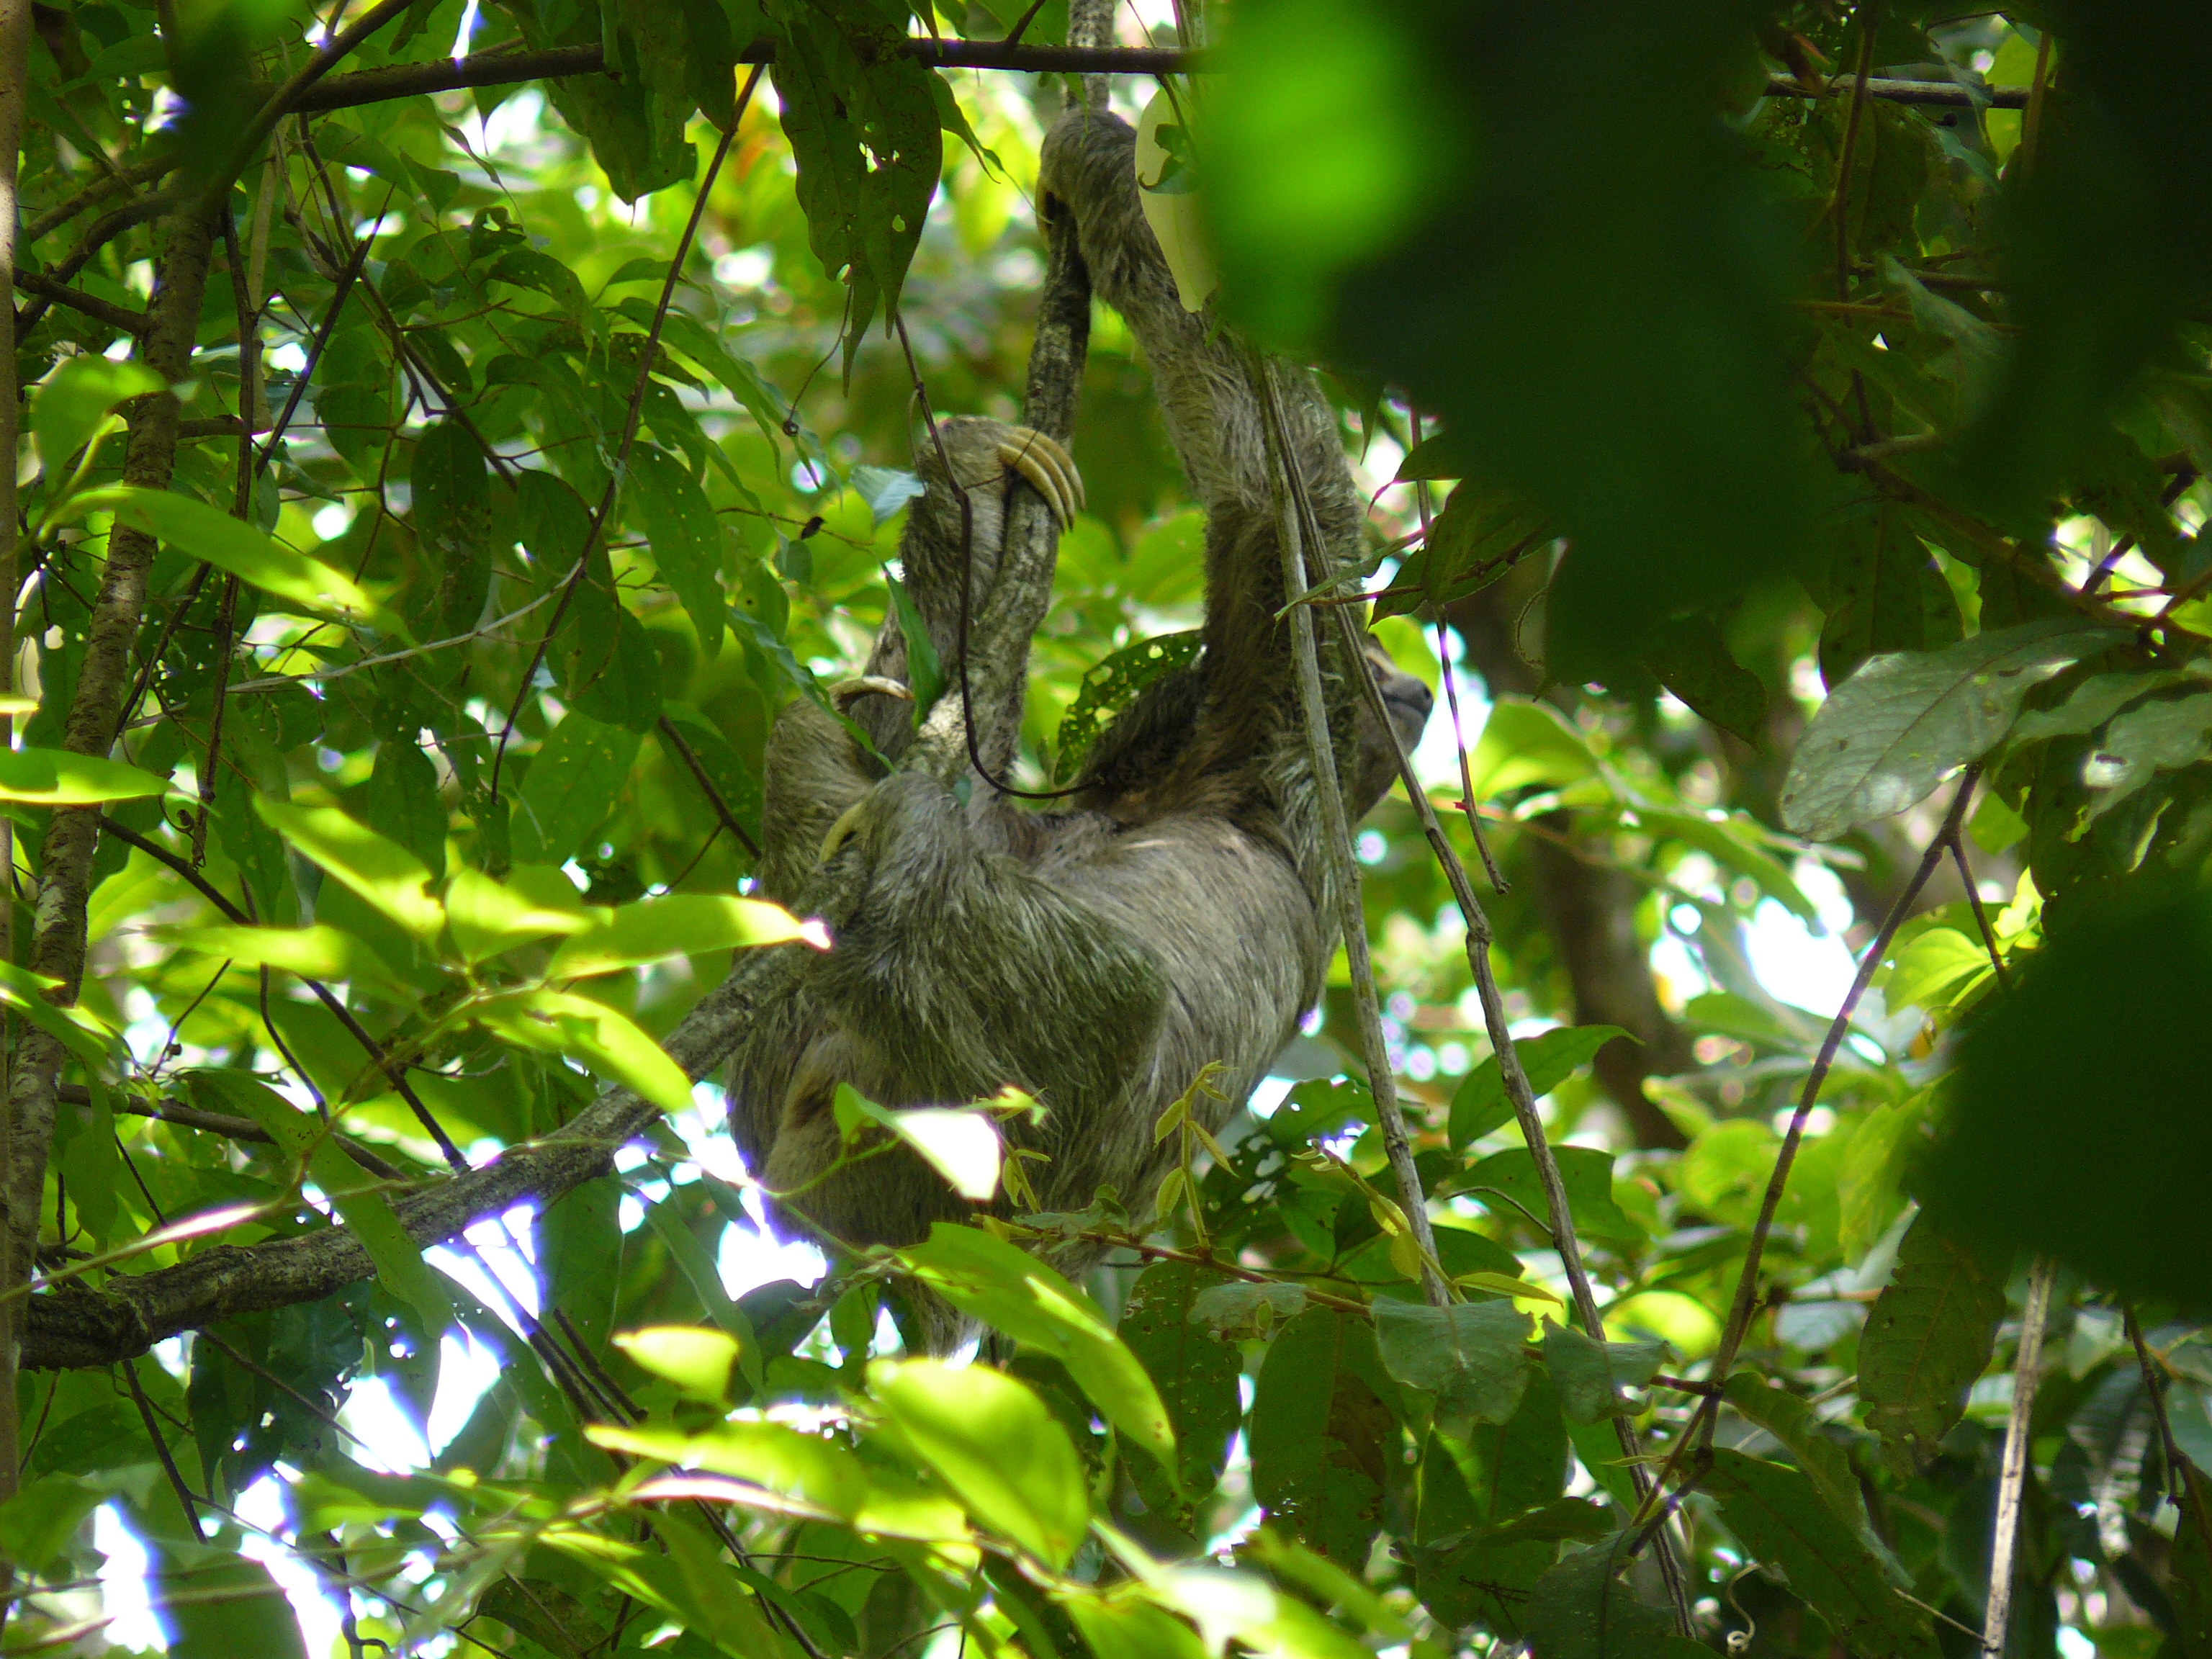 A three-toed sloth in a tree